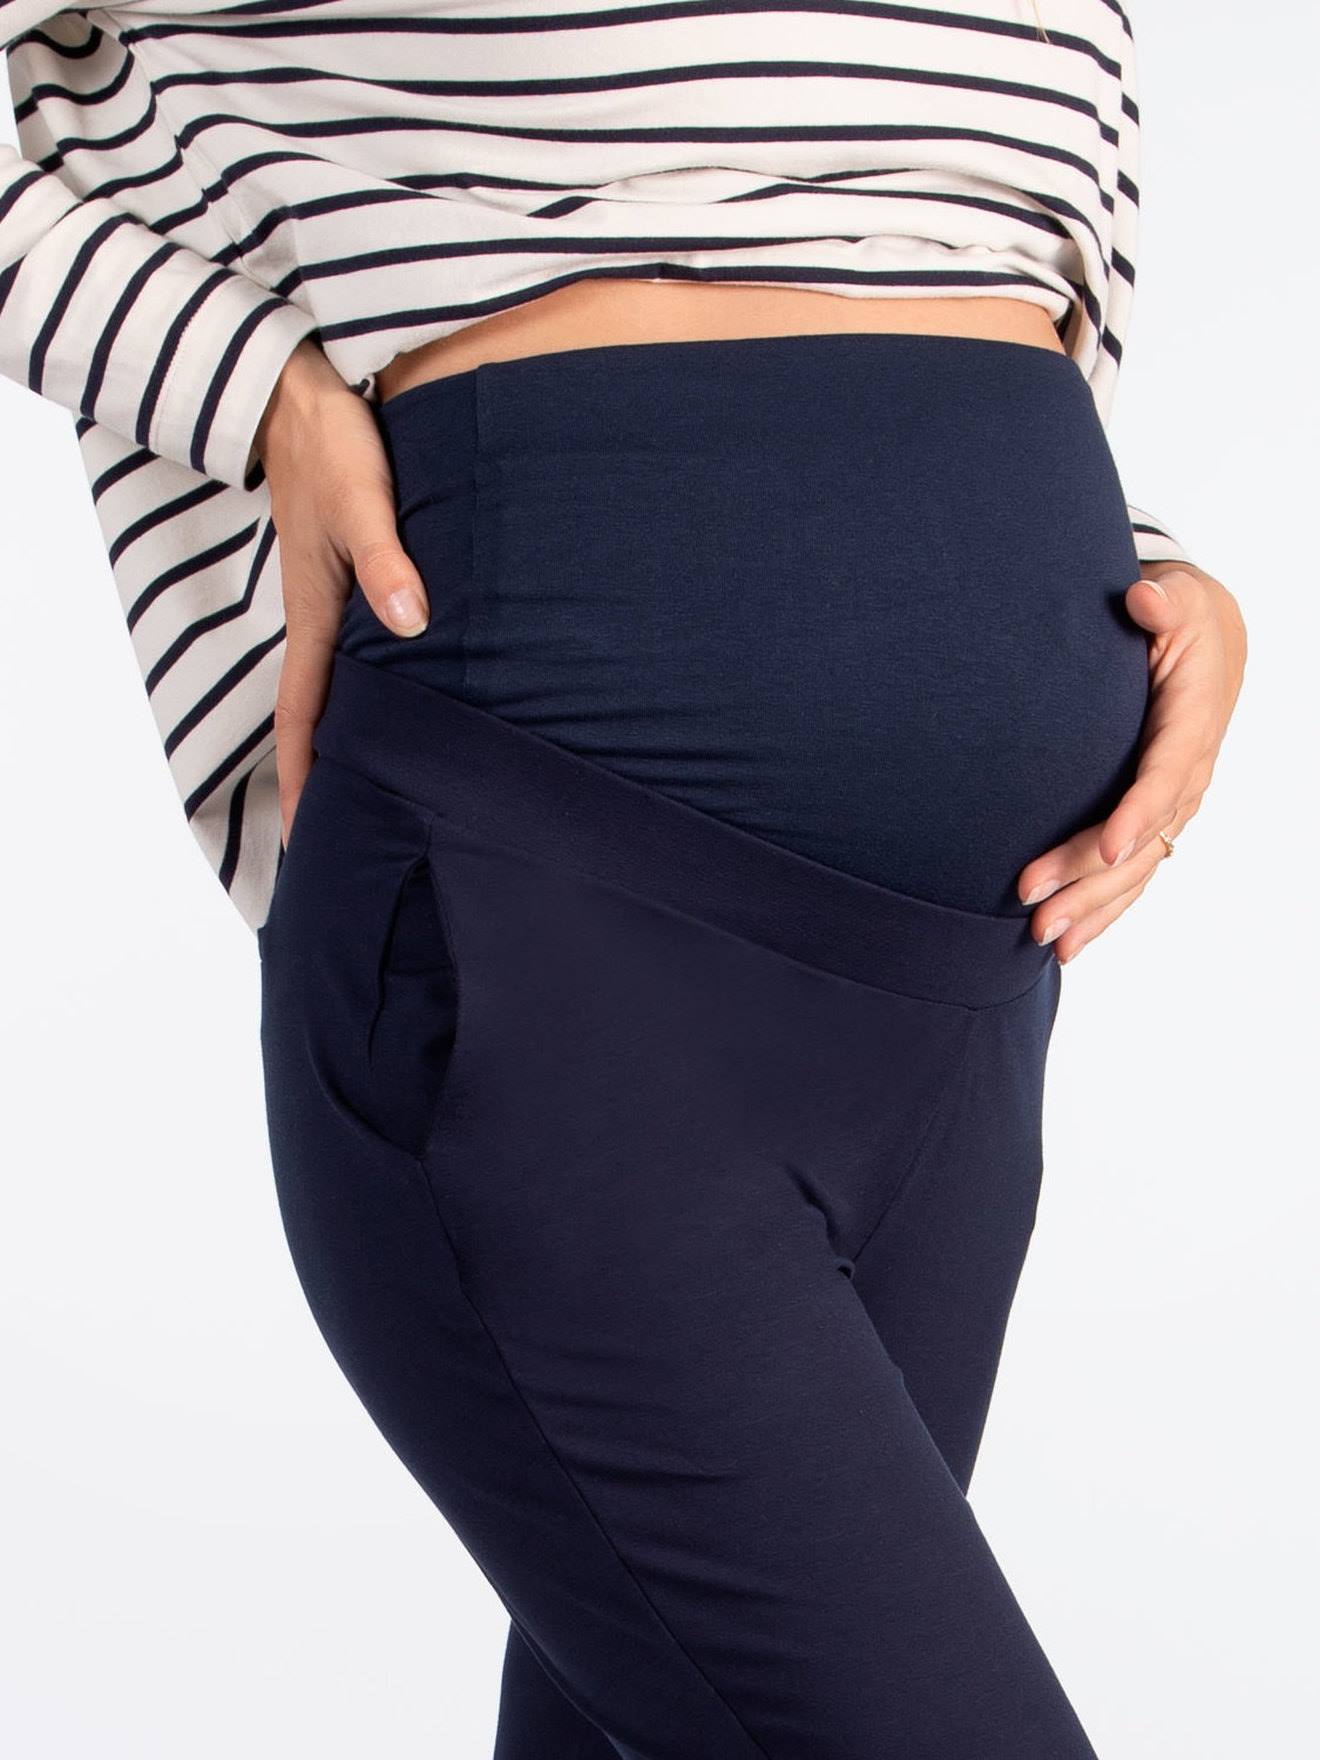 https://media.vertbaudet.com/Pictures/vertbaudet/329451/jersey-knit-maternity-trousers-with-high-belly-band-clement-by-envie-de-fraise.jpg